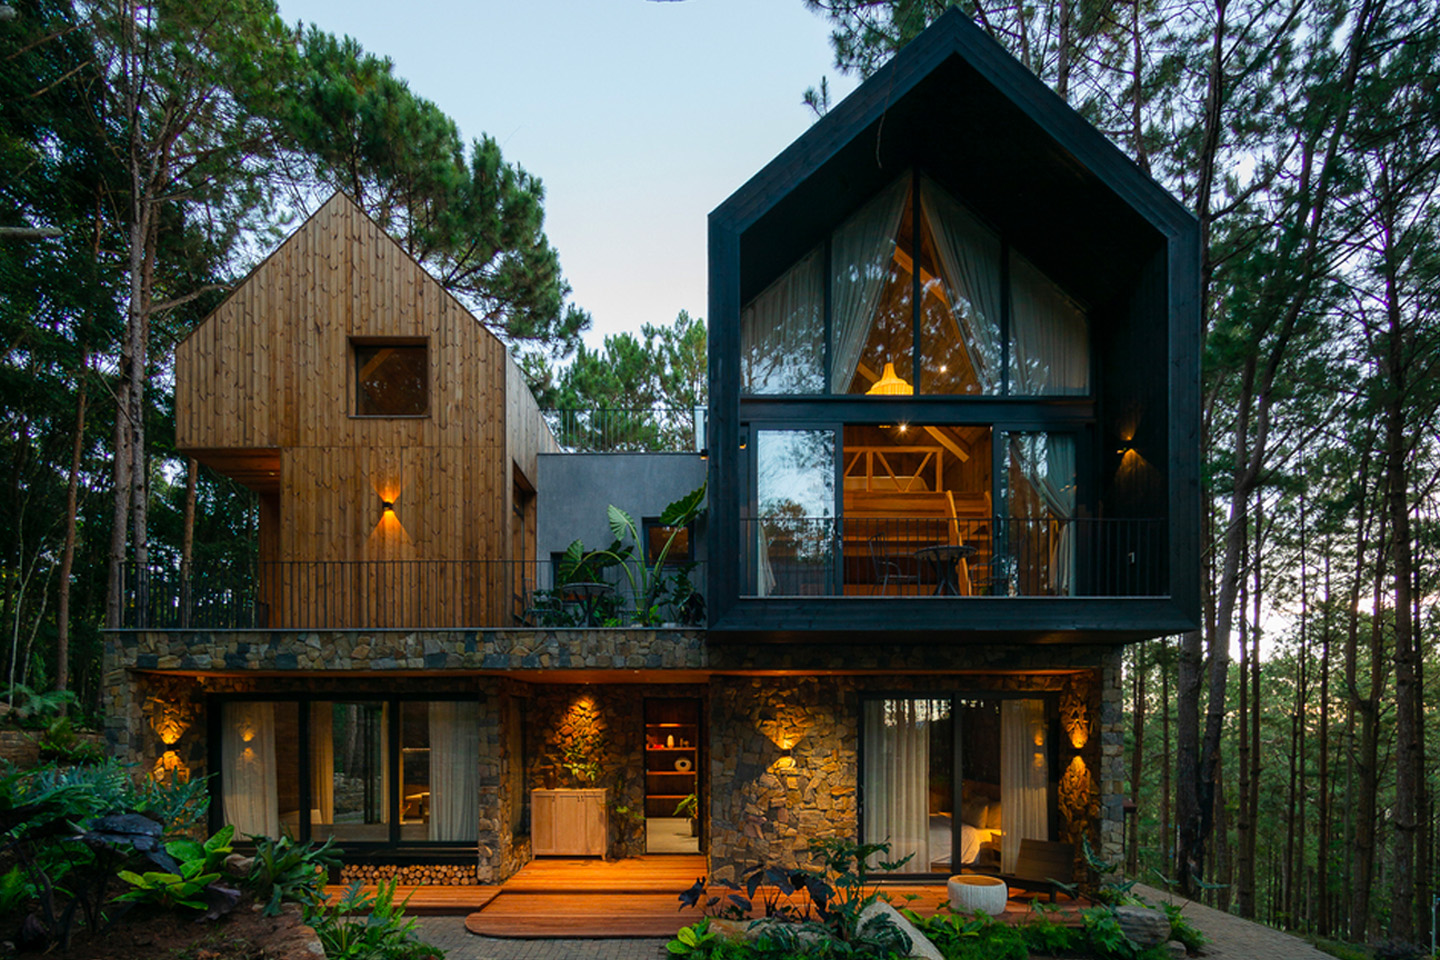 10 wooden homes every architecture enthusiast would want to move into ...